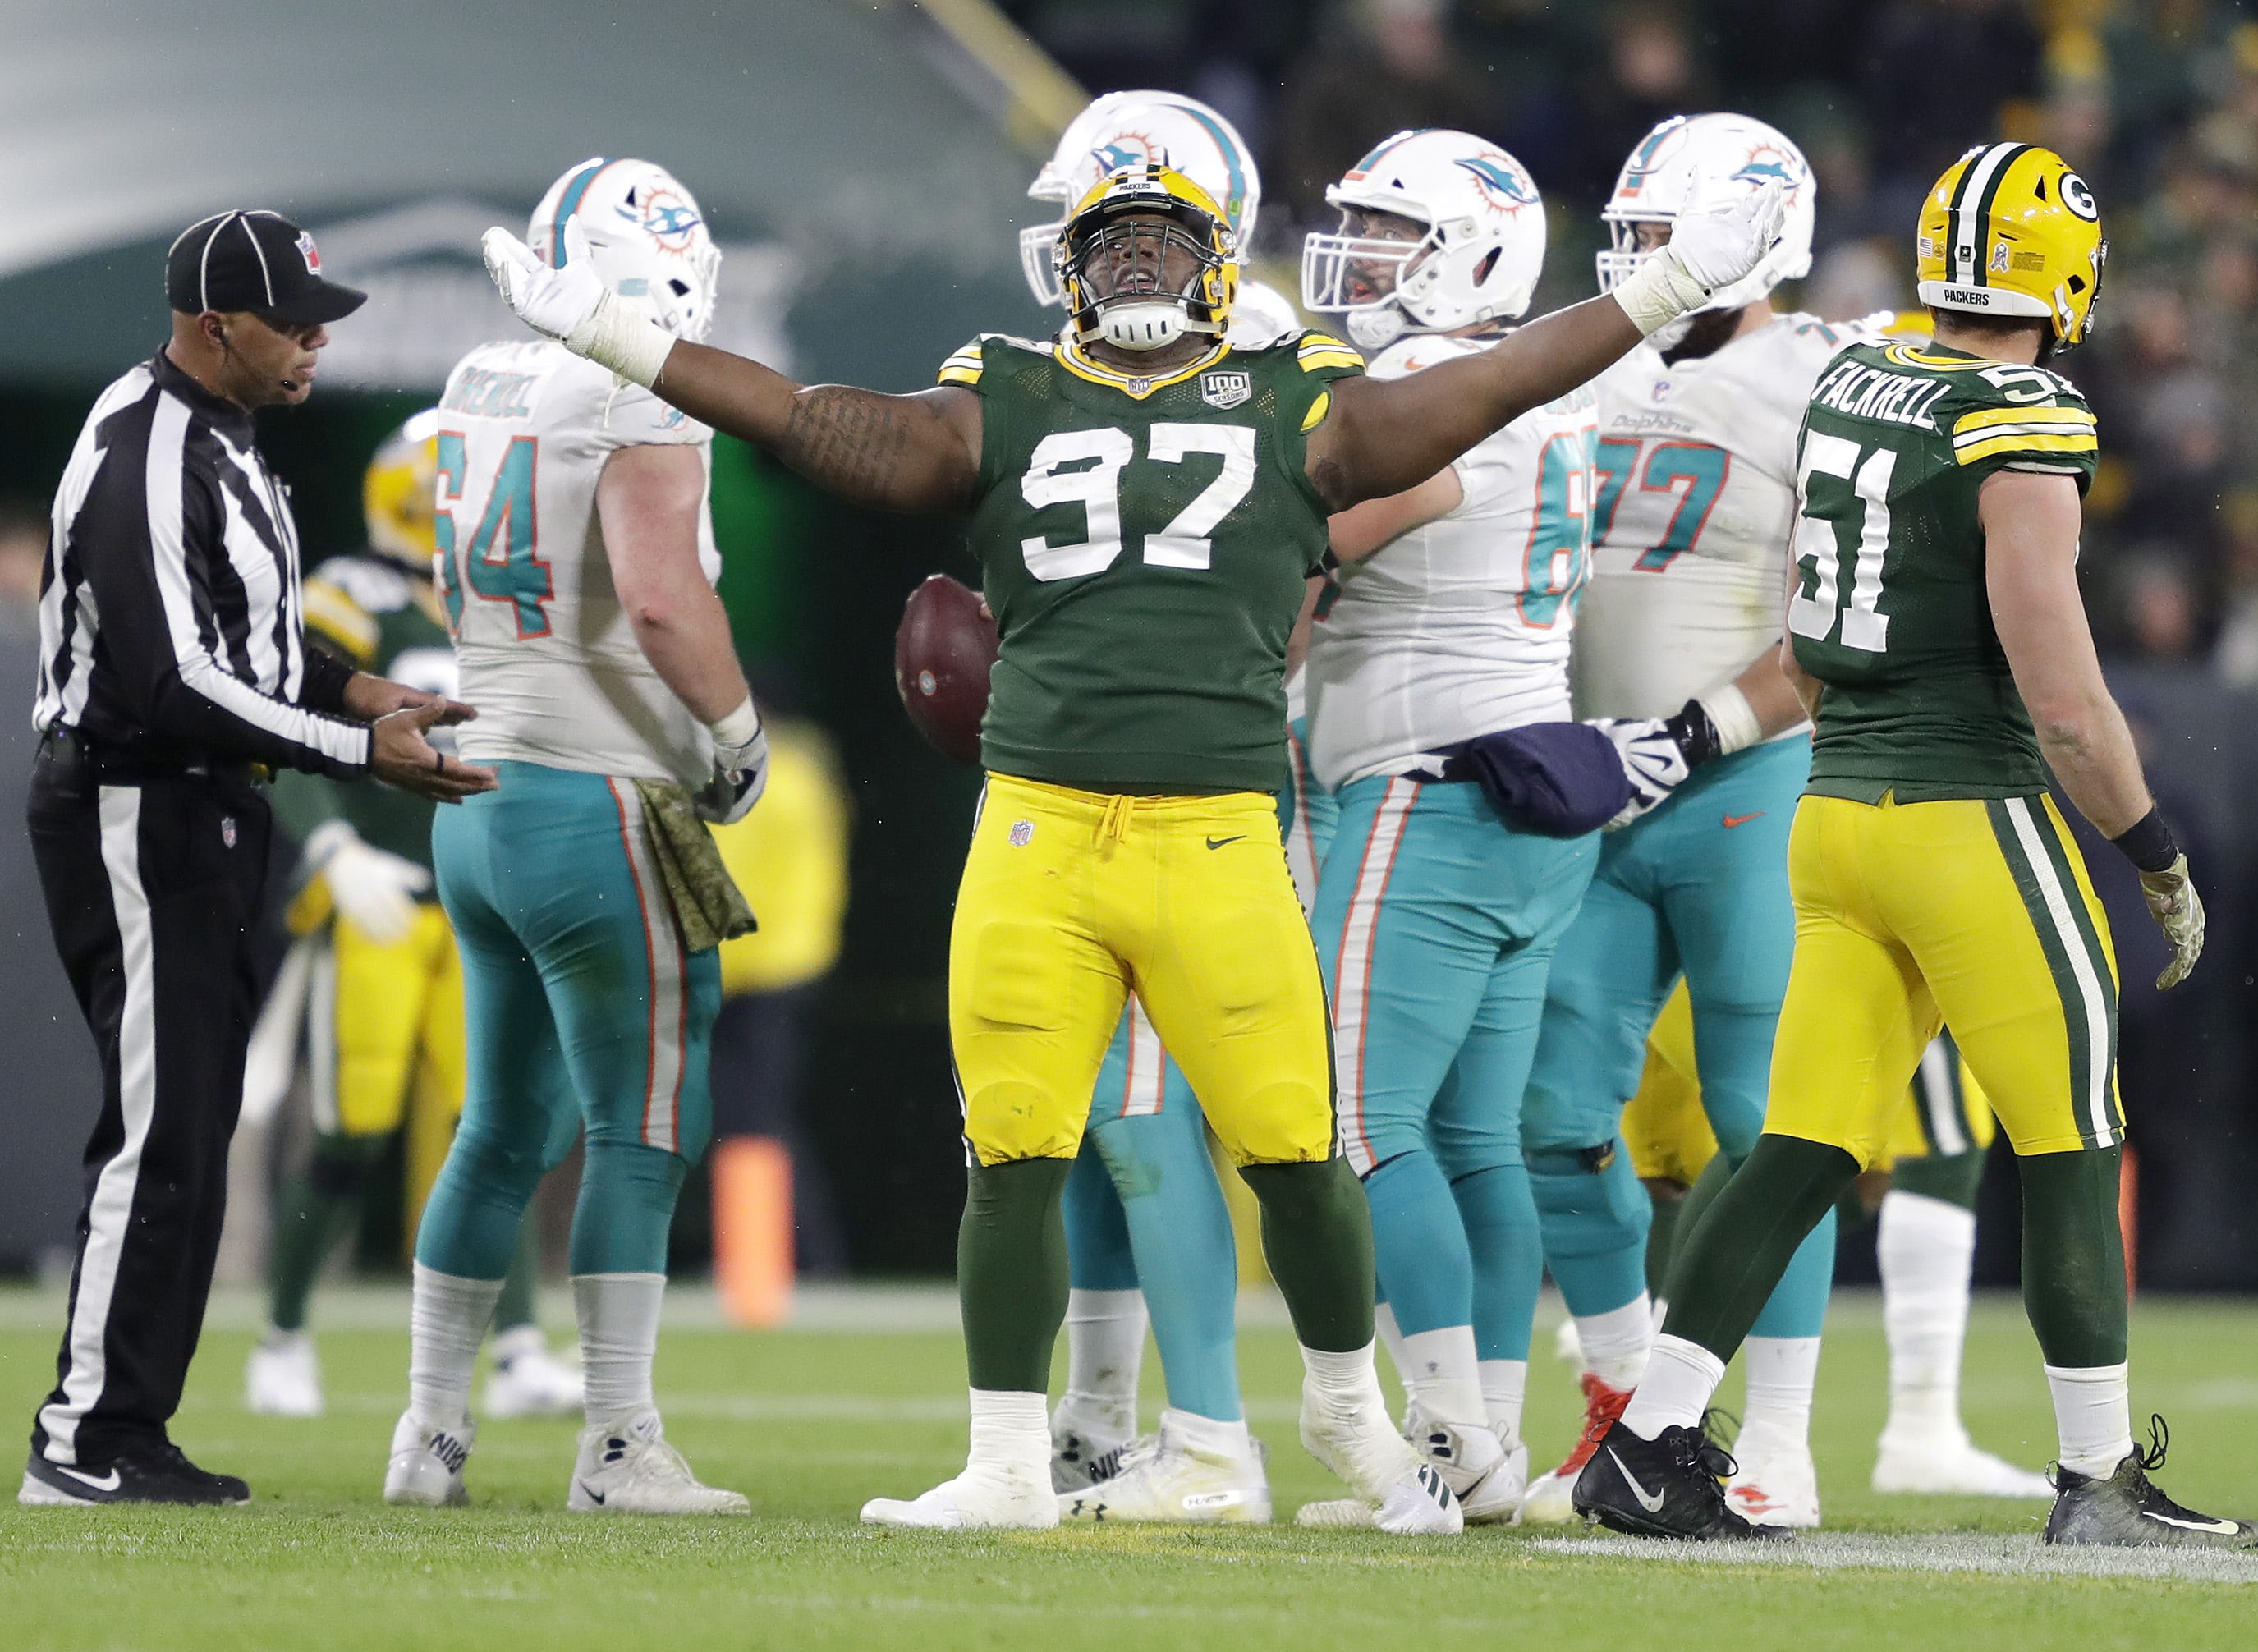 Green Bay Packers nose tackle Kenny Clark celebrates a sack against the Miami Dolphins during their football game on Sunday, November 11, 2018, at Lambeau Field in Green Bay, Wis.
Wm. Glasheen/USA TODAY NETWORK-Wisconsin.